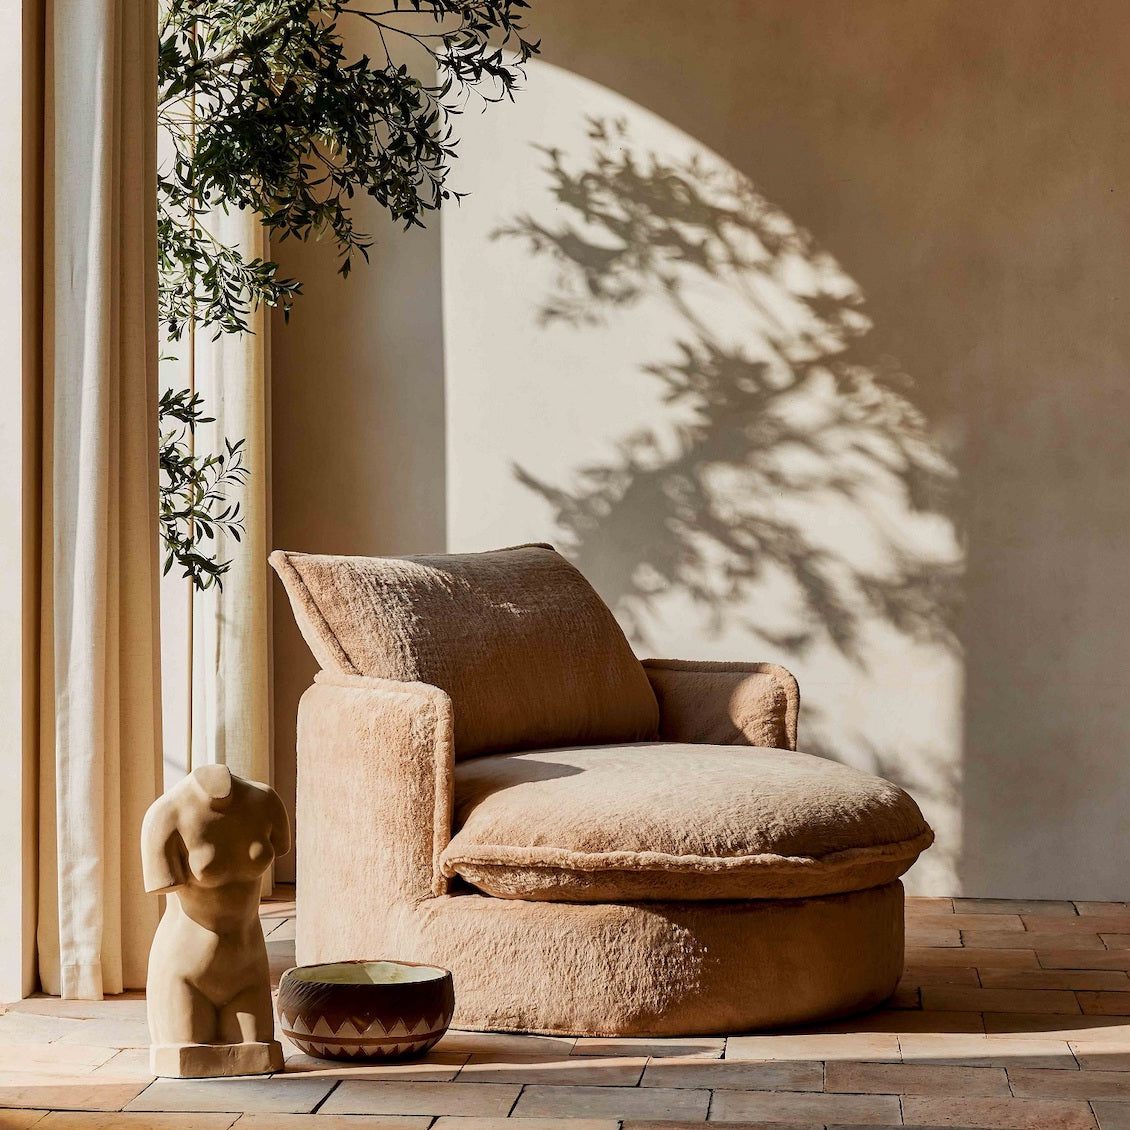 Neva Round Daybed in Pampas Flow, a light tan brown Recycled Faux Fur, placed in a sunlit room with a floor plant